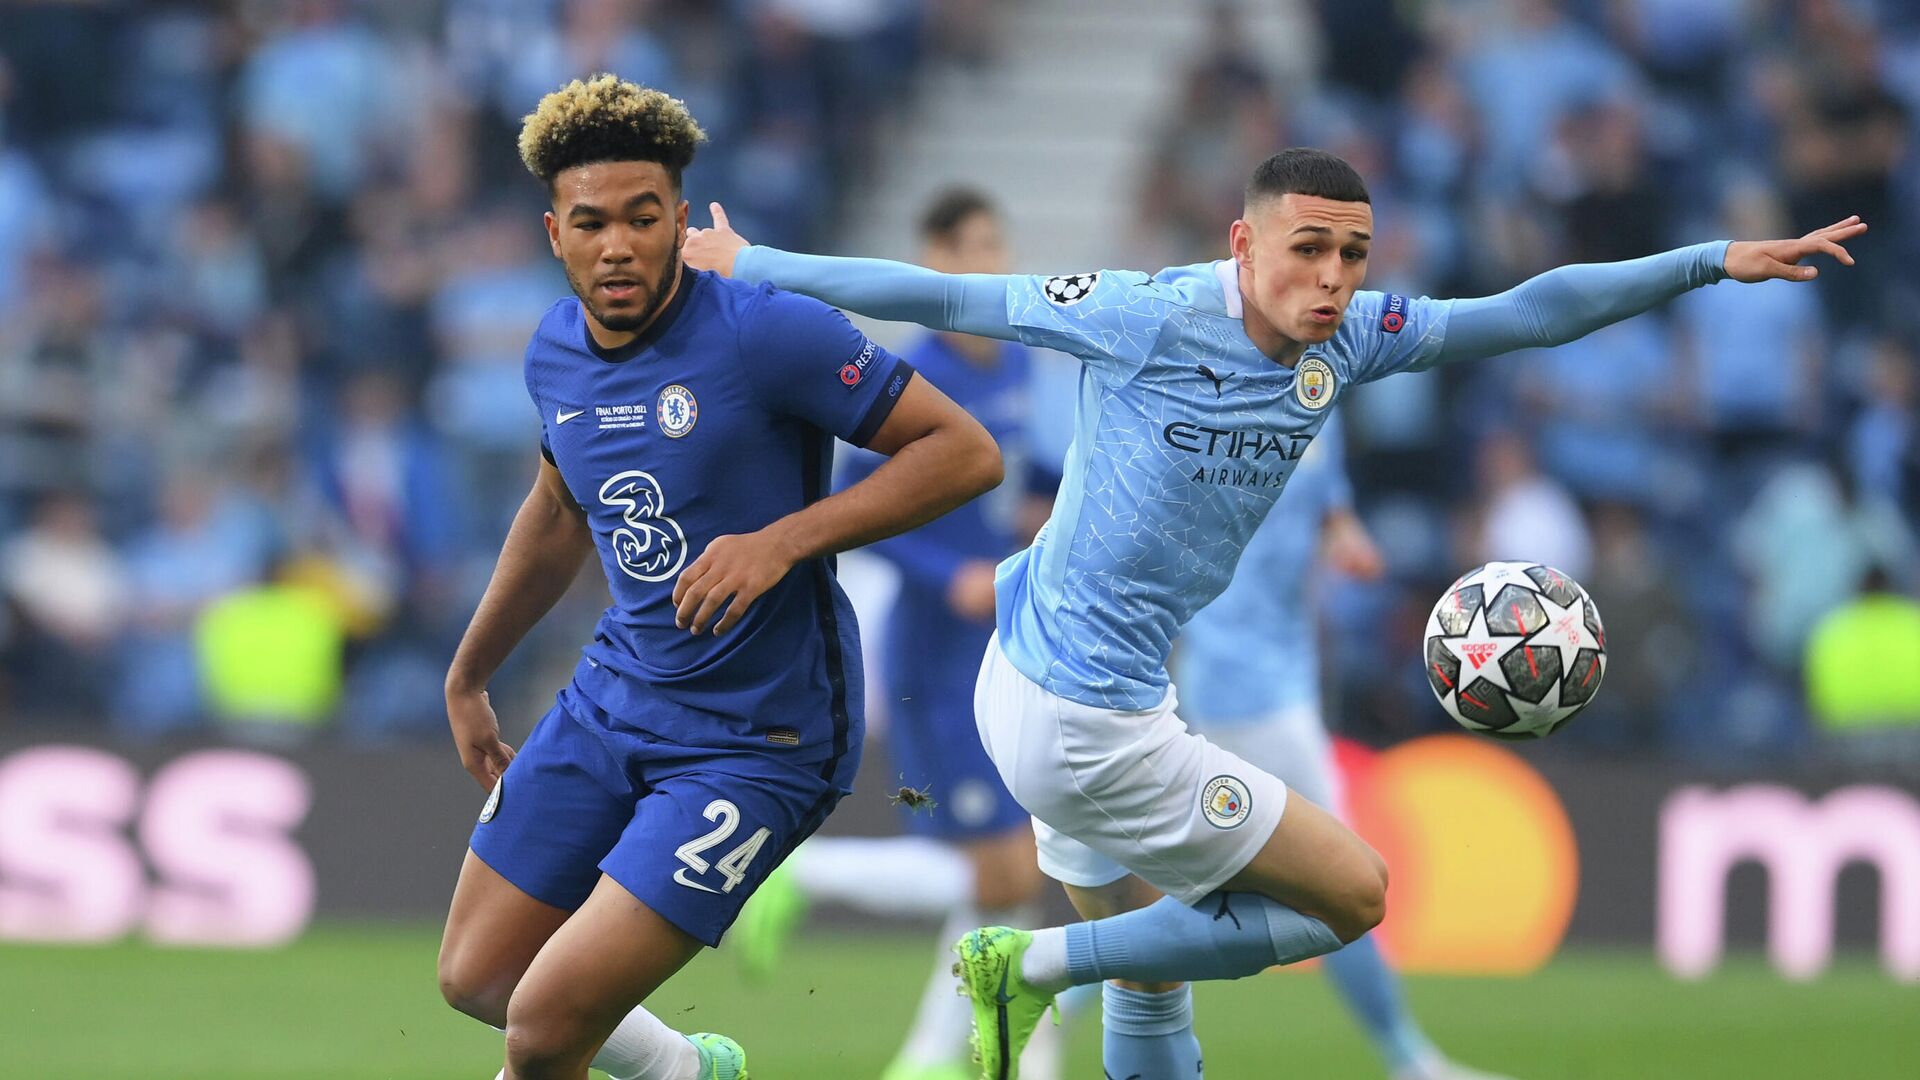 Soccer Football - Champions League Final - Manchester City v Chelsea - Estadio do Dragao, Porto, Portugal - May 29, 2021  Chelsea's Reece James in action with Manchester City's Phil Foden Pool via REUTERS/David Ramos - РИА Новости, 1920, 30.05.2021